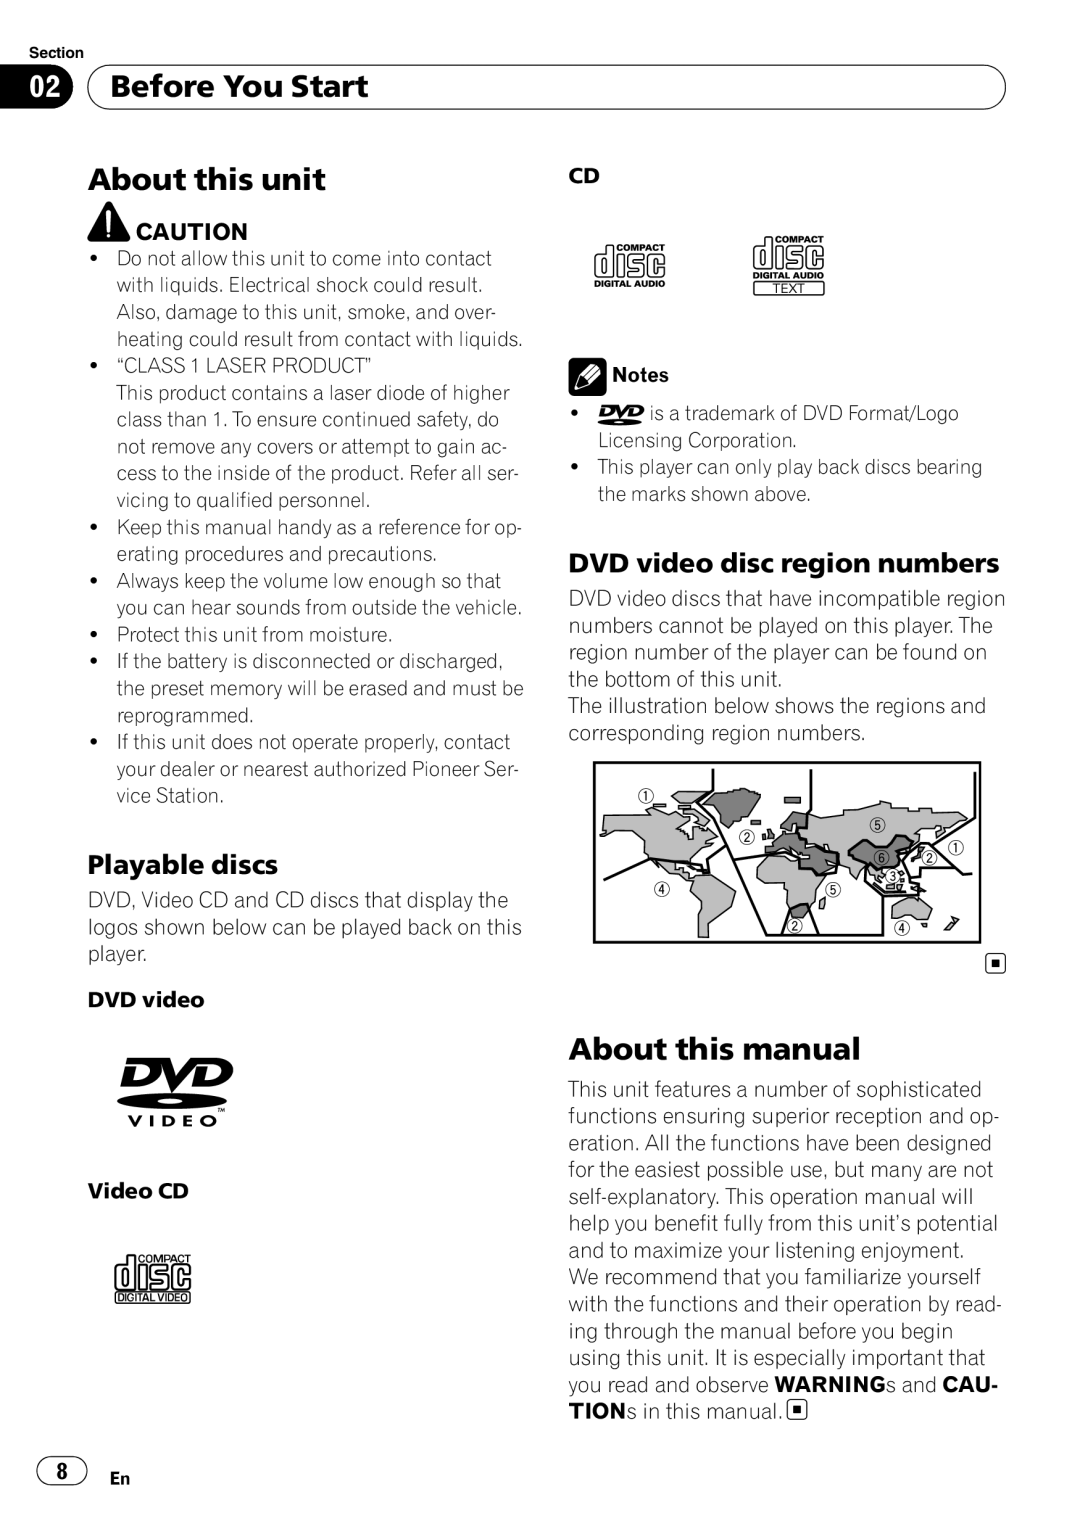 Pioneer AVH-P4050DVD Before You Start, About this unit, About this manual, DVD video disc region numbers, Playable discs 